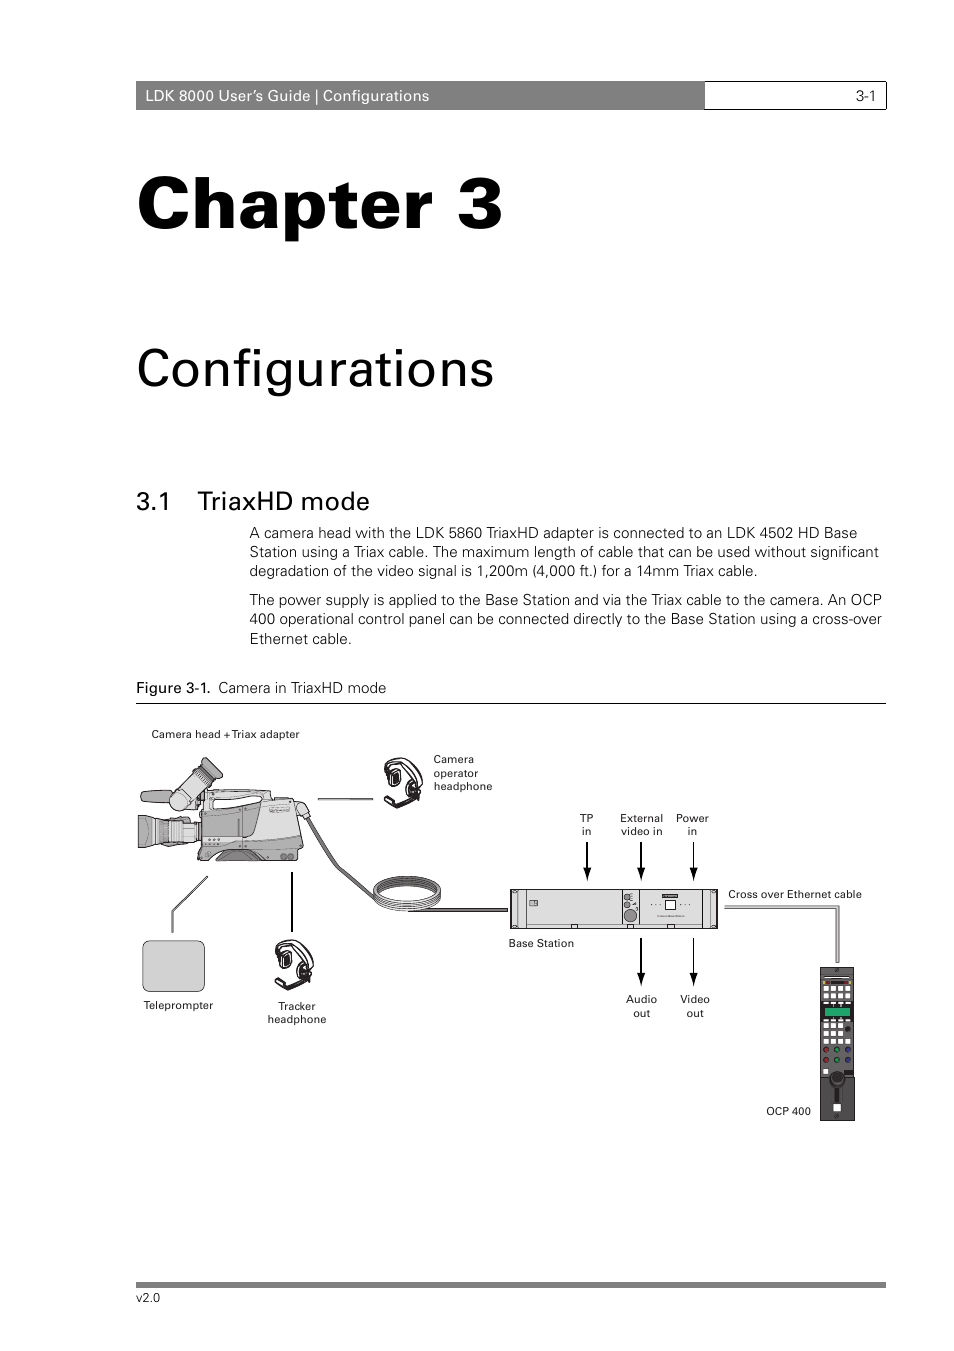 Chapter 3, Configurations, 1 triaxhd mode | Grass Valley LDK 8000 v.2.0  User Manual | Page 29 / 110